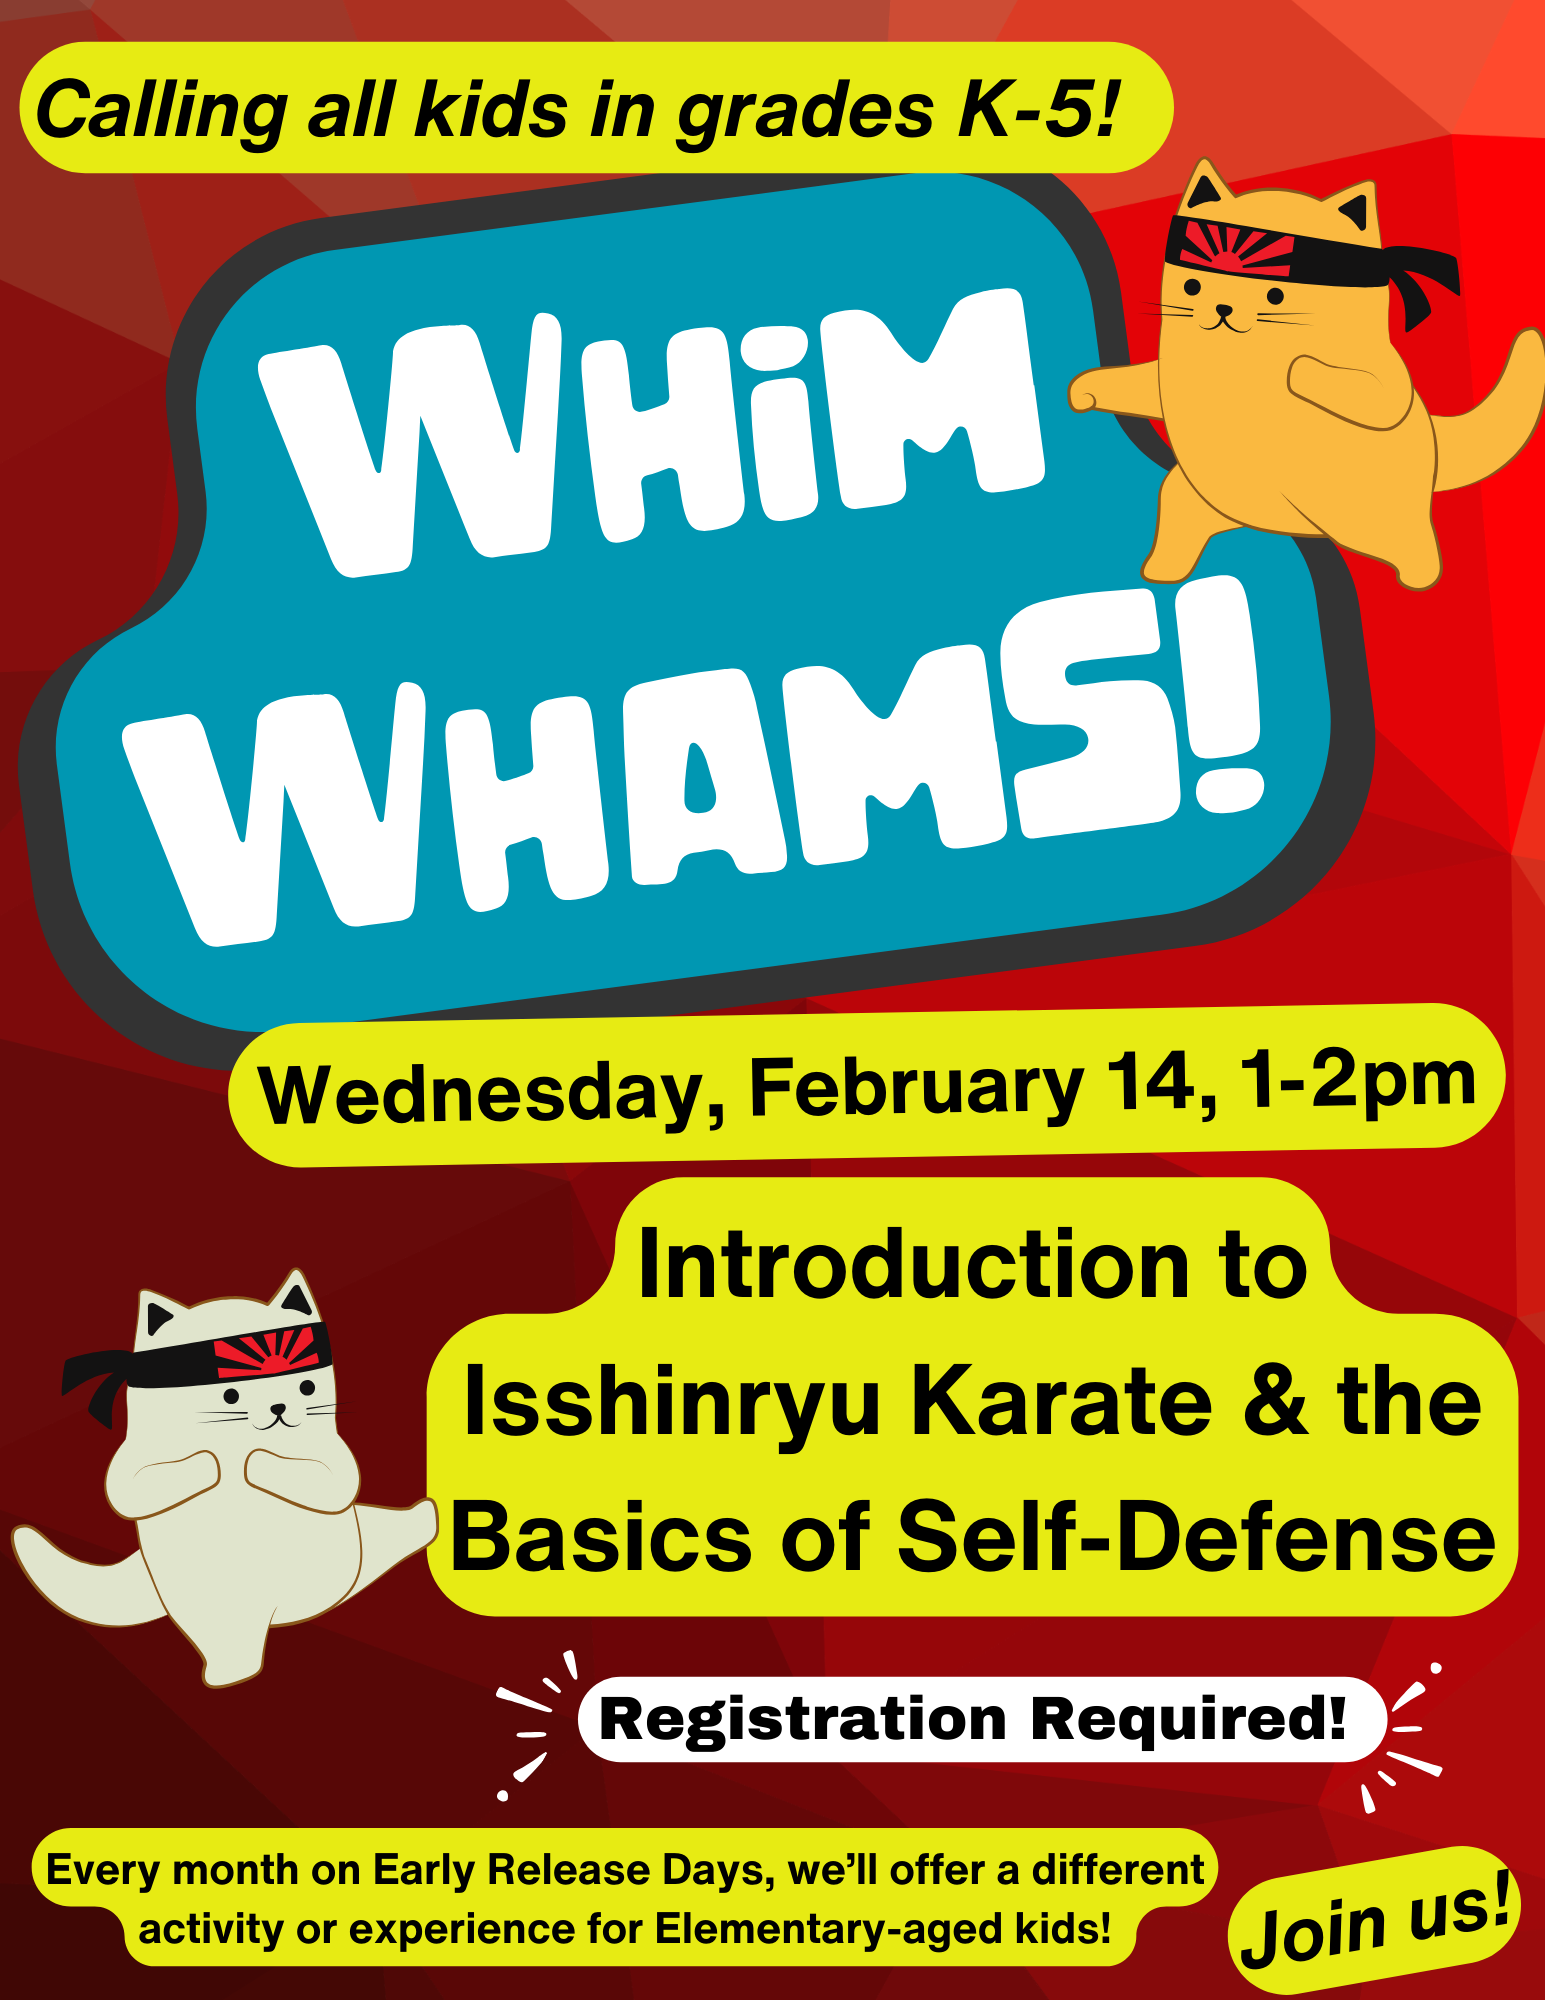 Image has two cats in karate poses, and text reads "Calling all kids in grades K-5! Whim Whams! Wednesday, February 14, 1-2pm. Introduction to Isshinryu Karate & the Basics of Self-Defense - Registration Required! Every month on Early Release Days, we’ll offer a different activity or experience for Elementary-aged kids! Join us!"